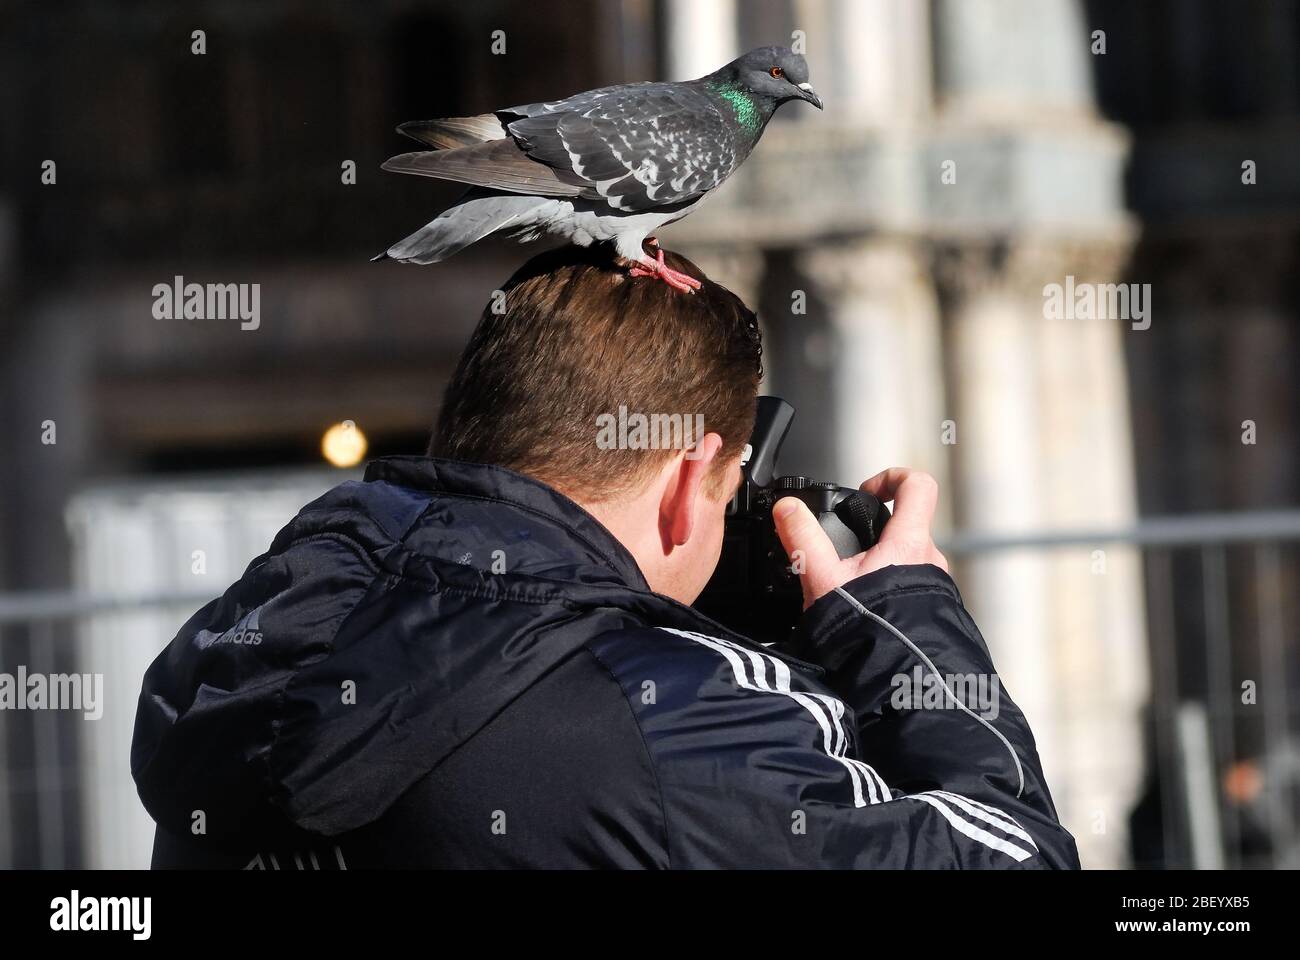 Venice, San Marco square, a pigeon poses on the head of a tourist photographing pigeons. Stock Photo